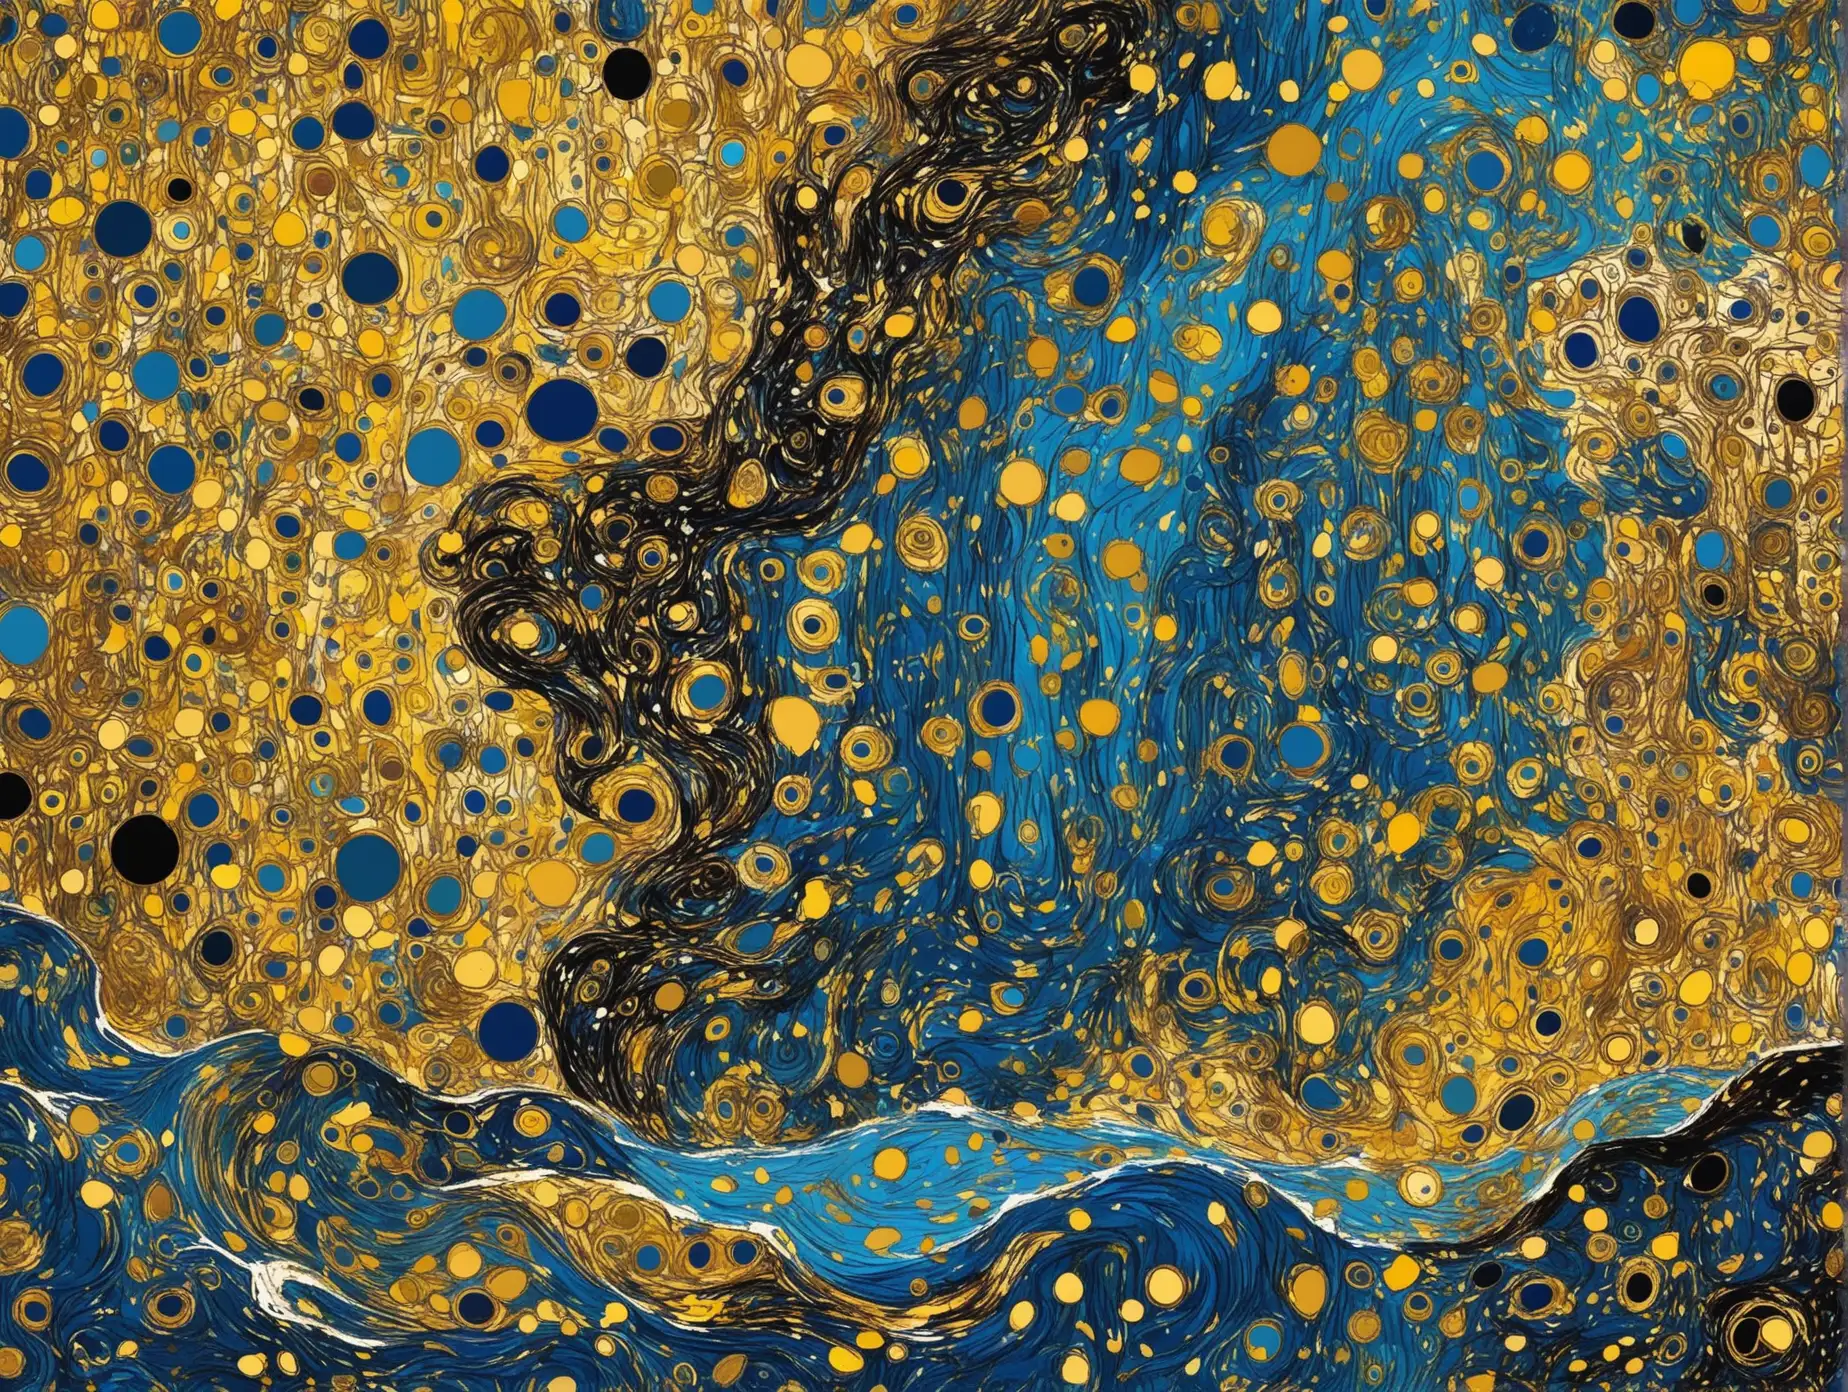  THe SEA IN STYLE OF KUSTAZ KLIMT AND JACKSON POLLOCK PSYCHEDELIC, CRAZY BACKGROUND GOLD MESSY,    
BLUE THE SEA THE SEA 
LESS BUSY

